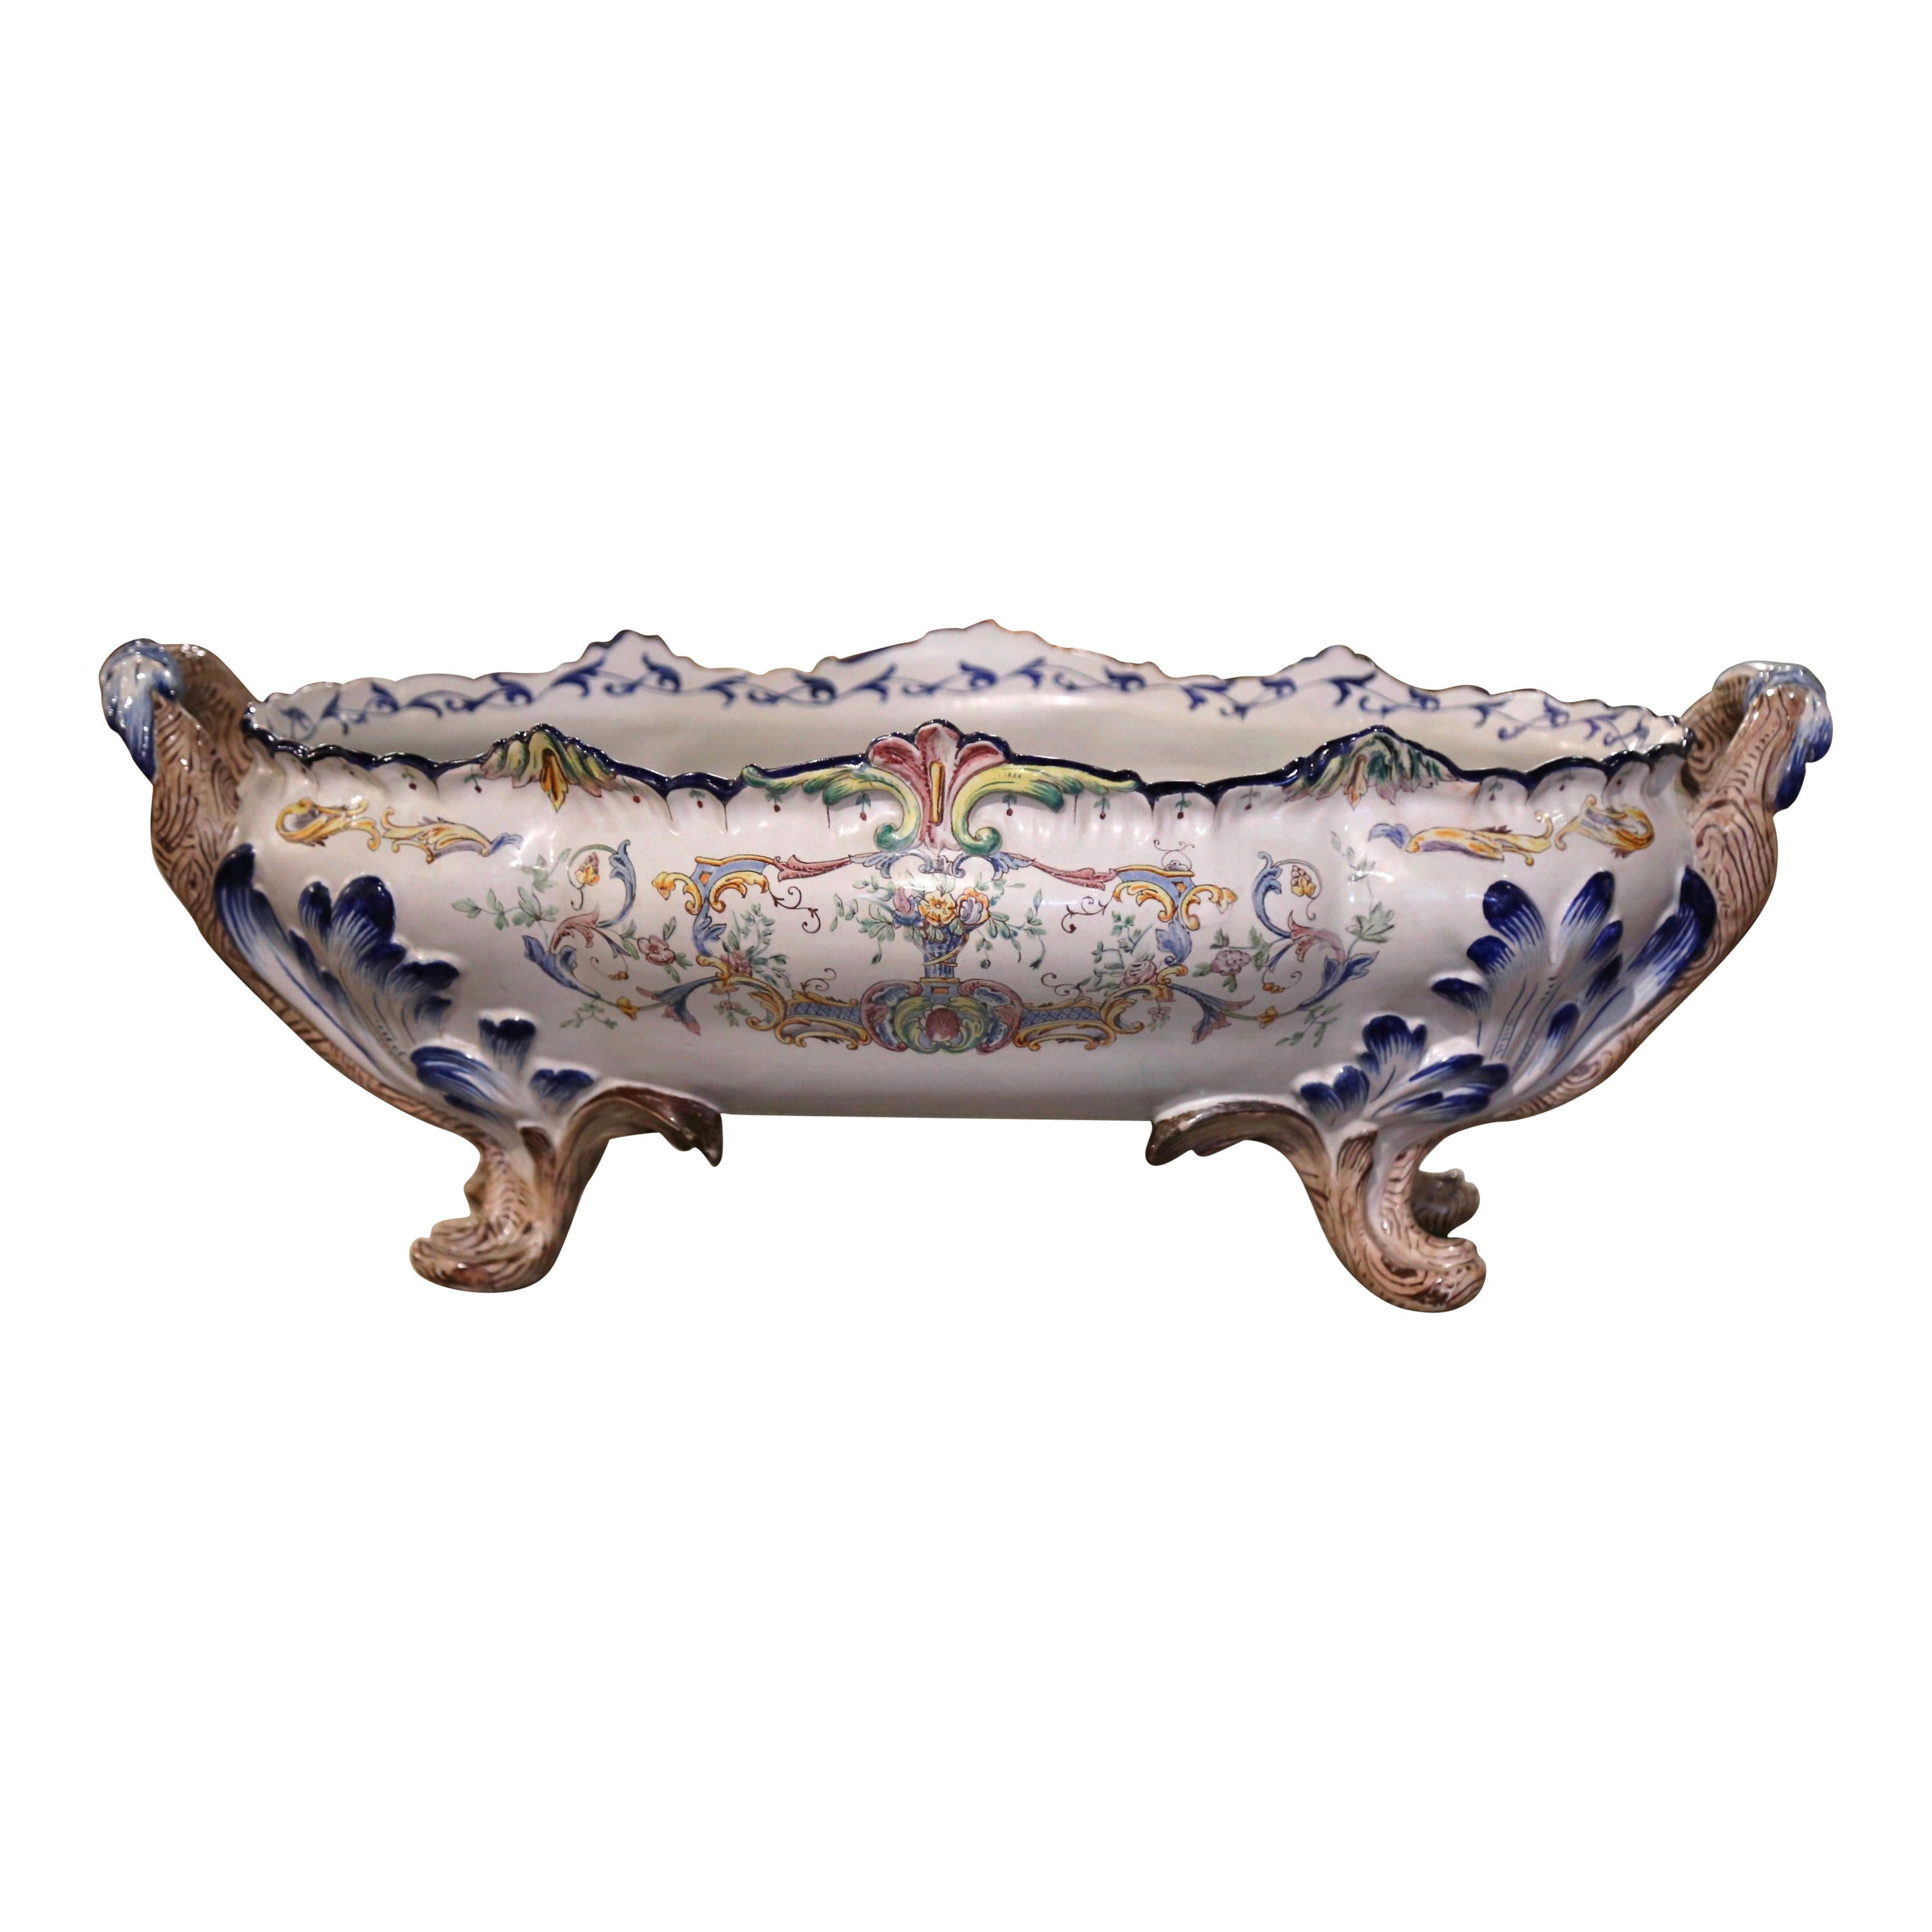 19th Century French Hand Painted Faience Oblong Jardinière with Floral Motifs